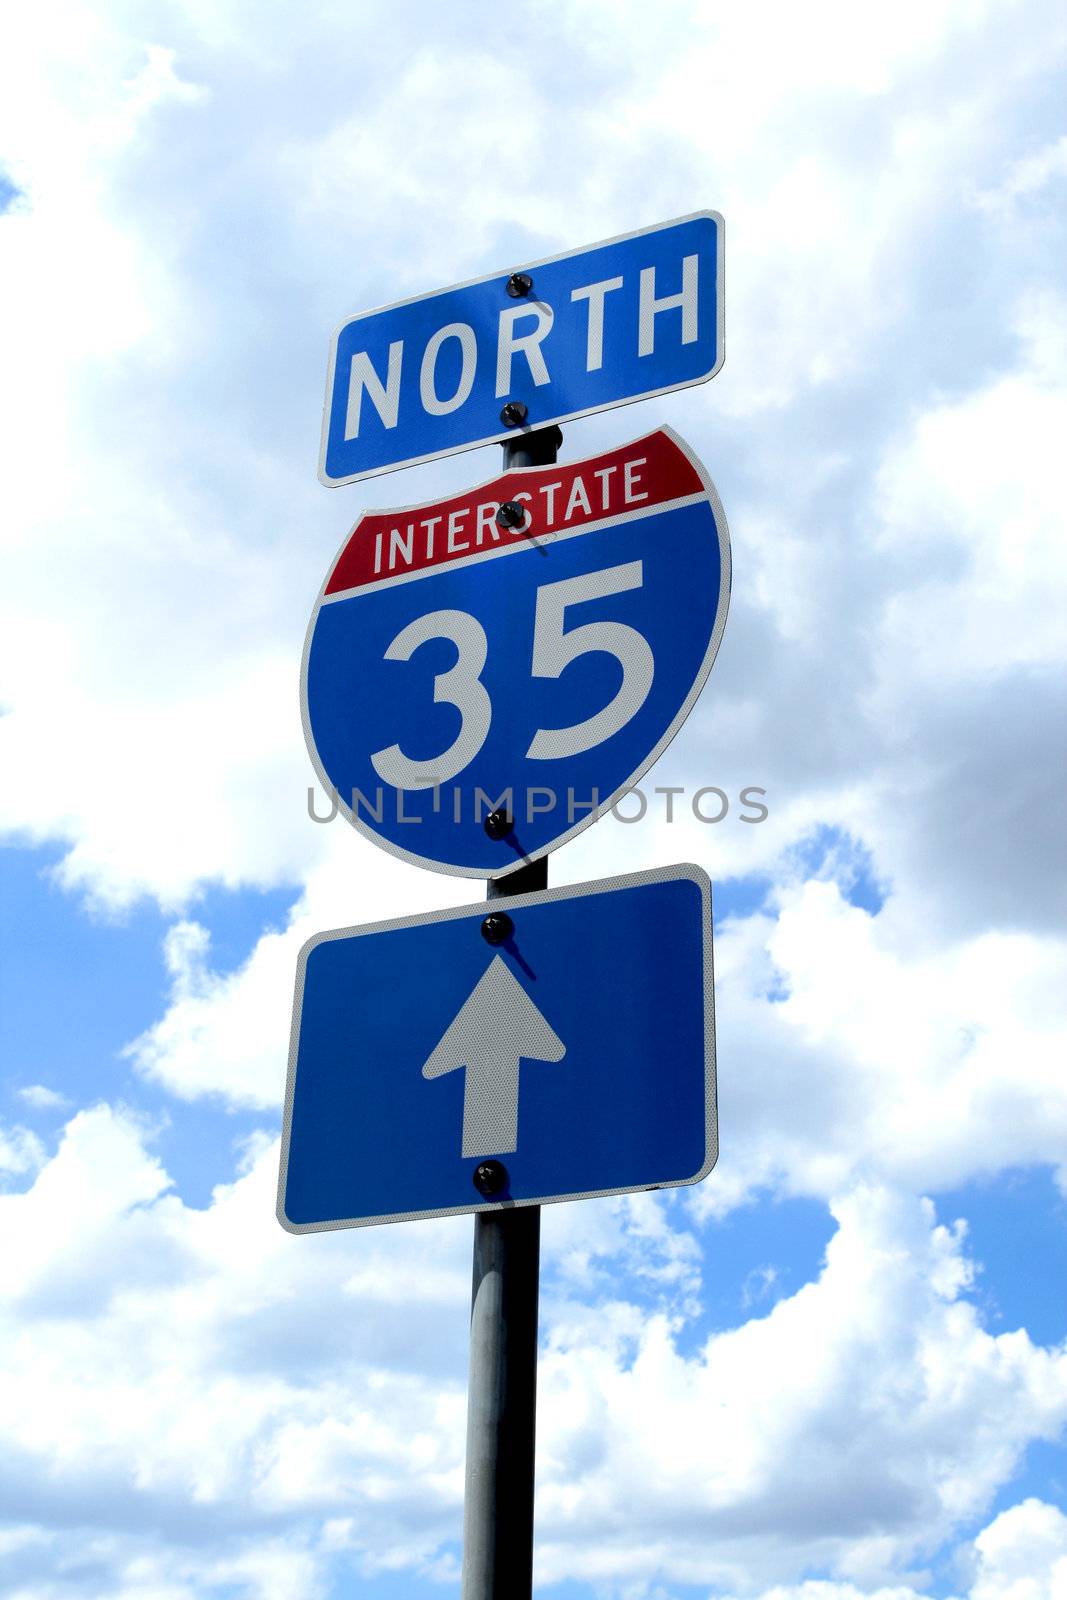 A highway 35 road sign in Texas.